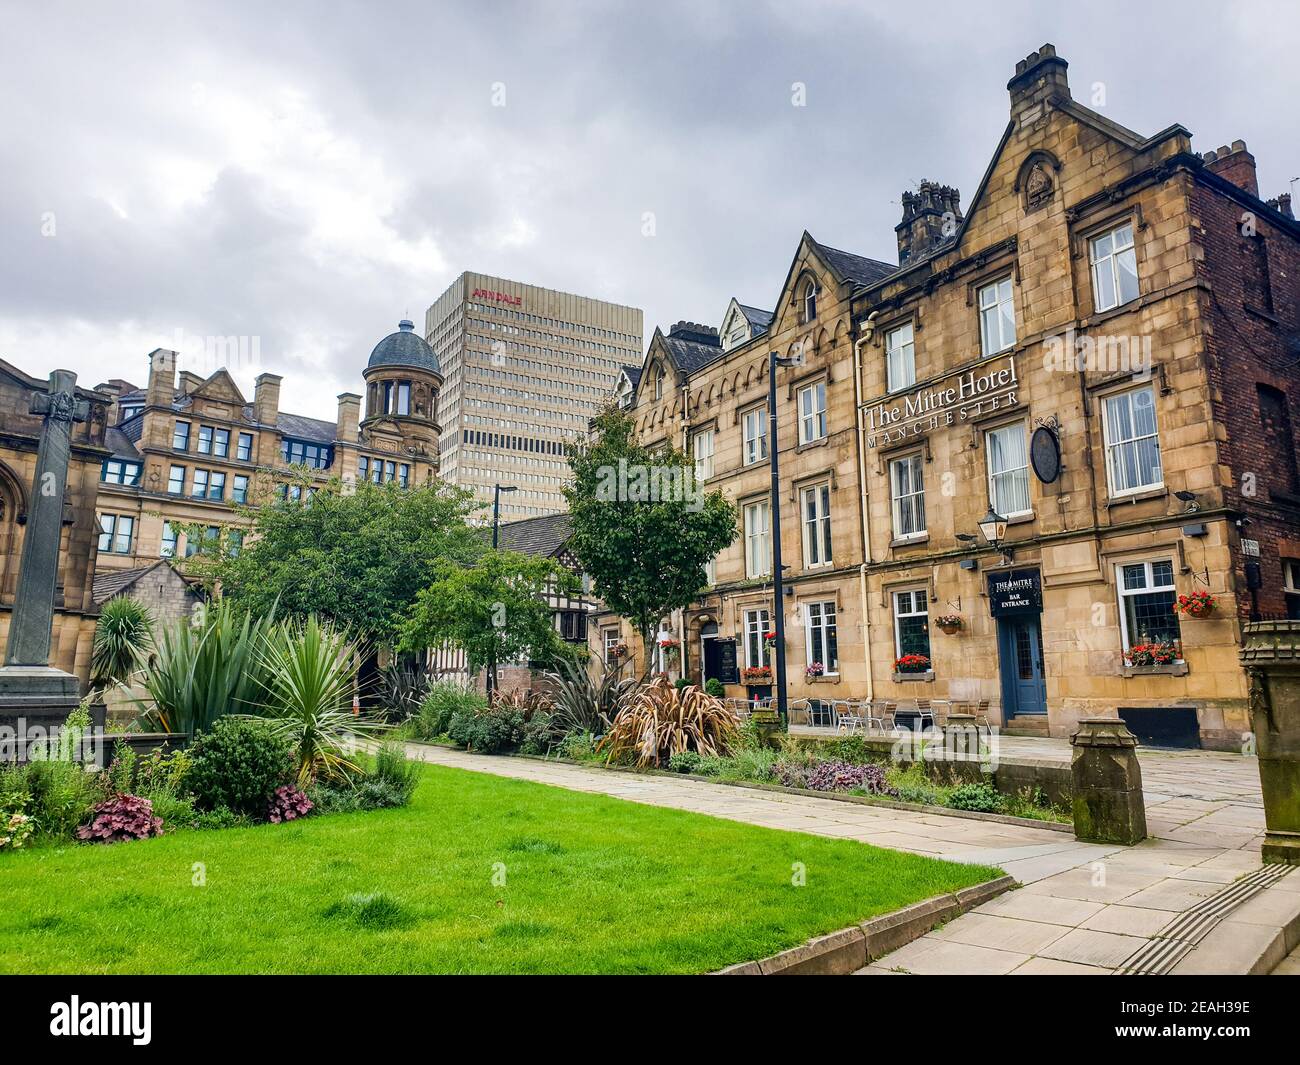 The Mitre Hotel, Manchester Cathedral courtyard, England, UK Stock Photo